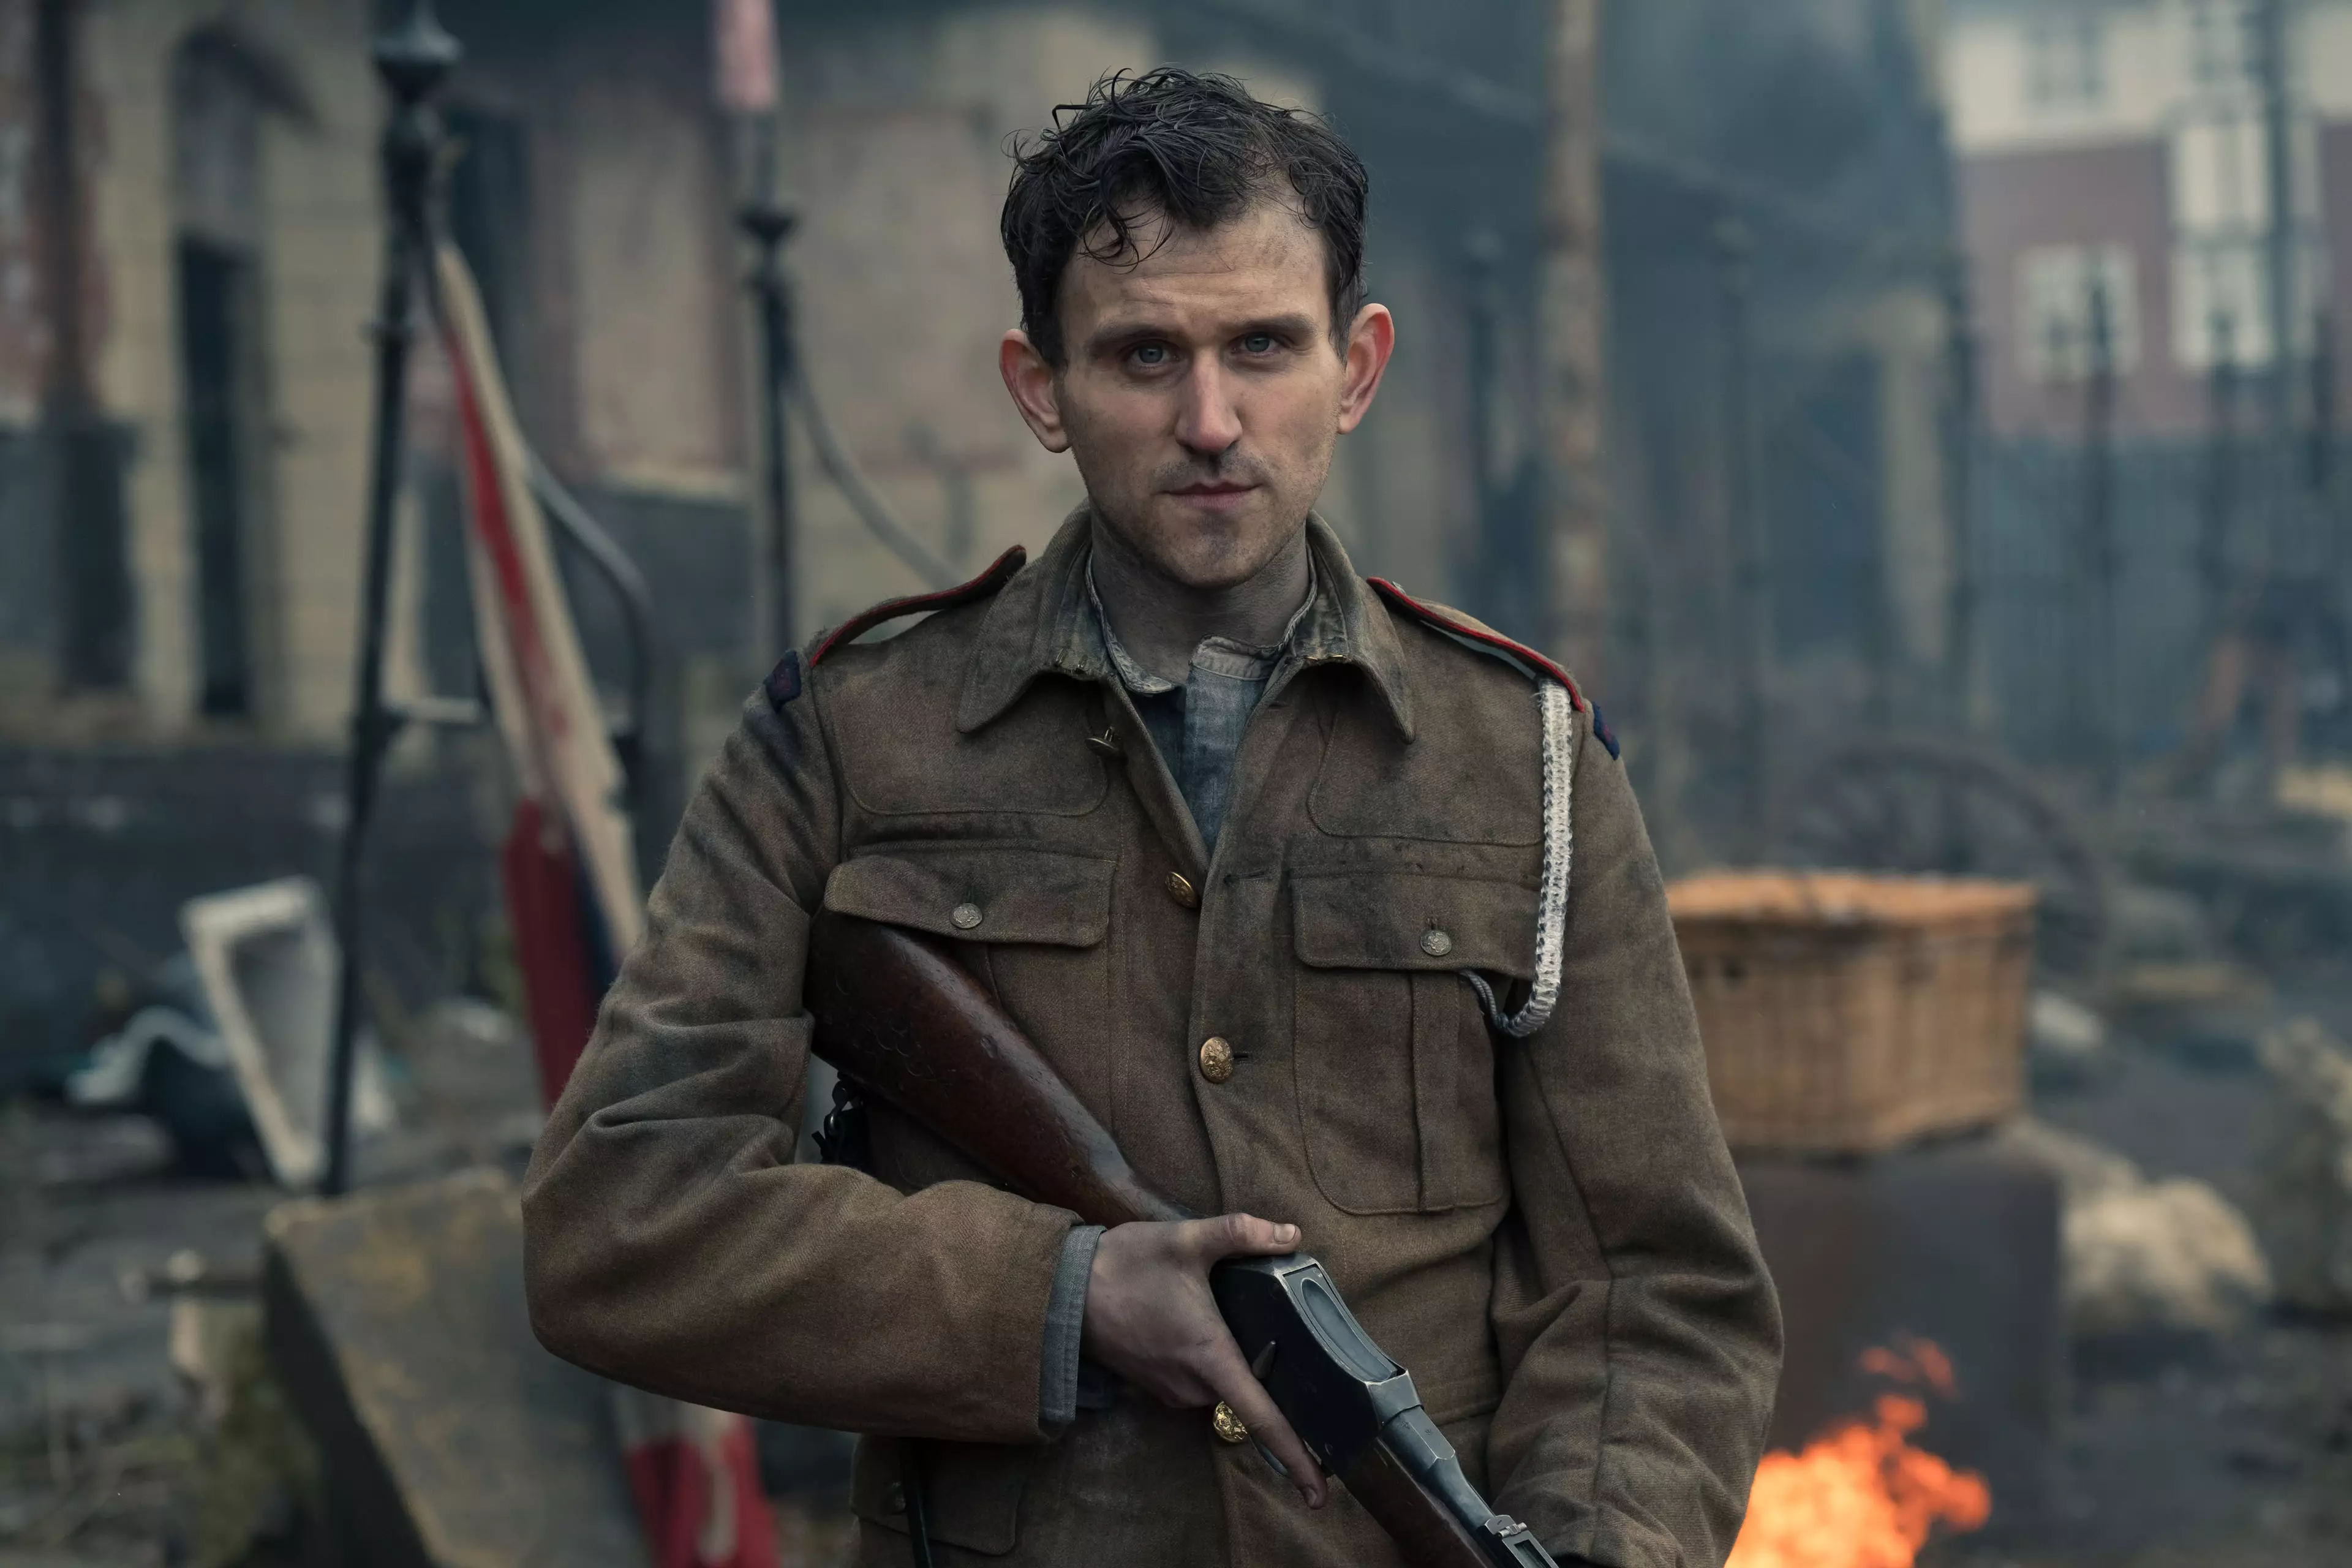 Harry also plays a soldier in anothe BBC Sunday night drama: War of the Worlds (